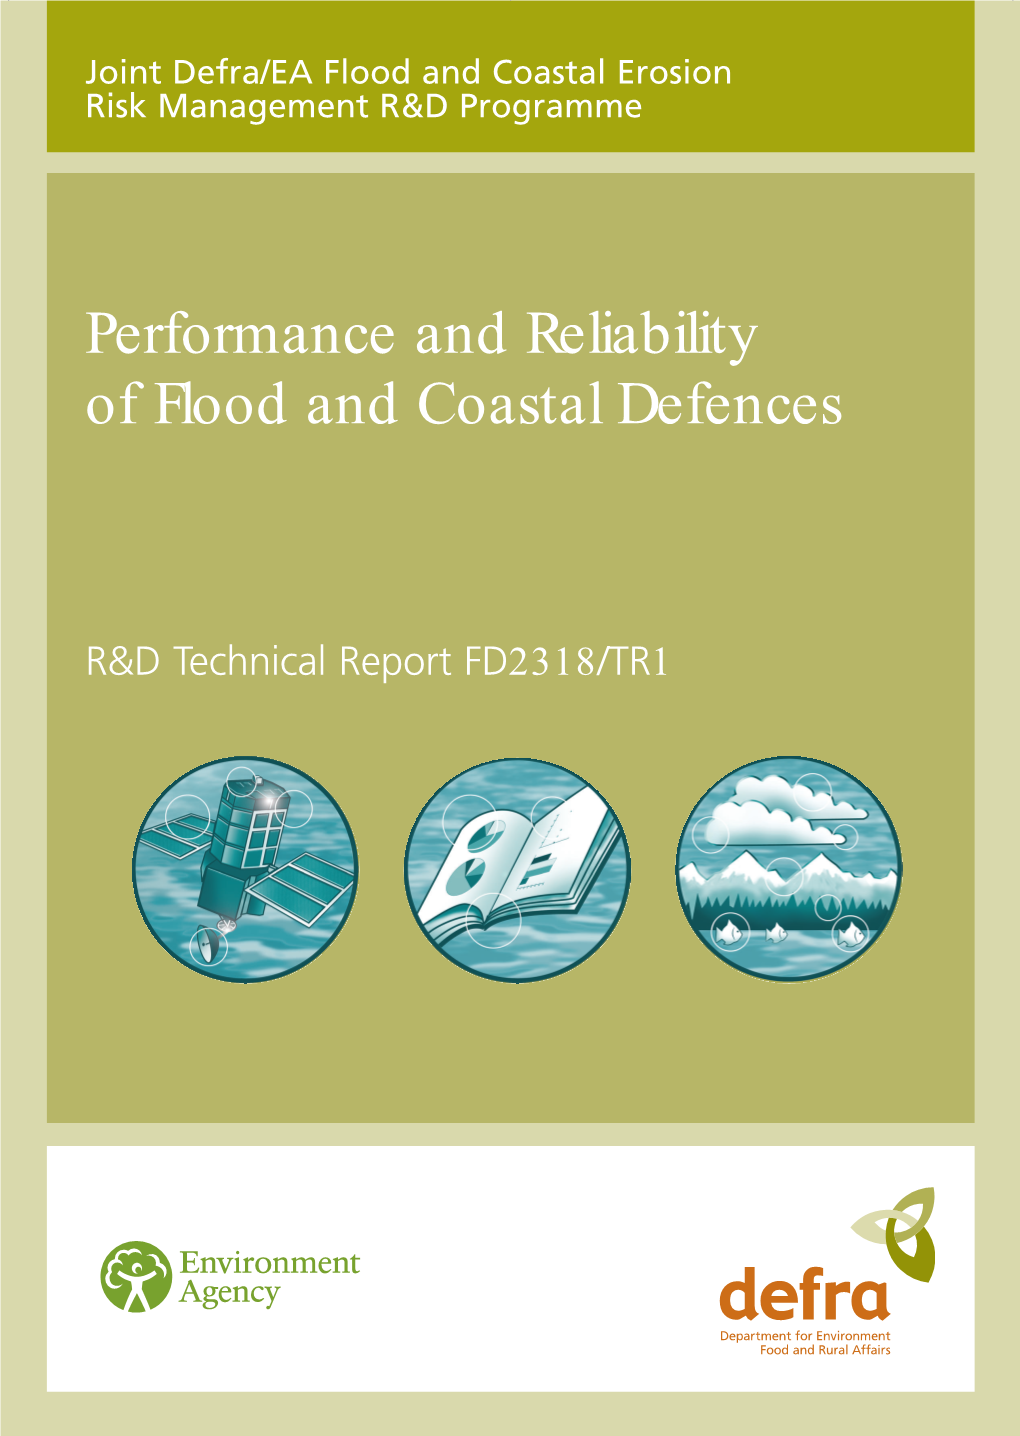 Performance and Reliability of Flood and Coastal Defences